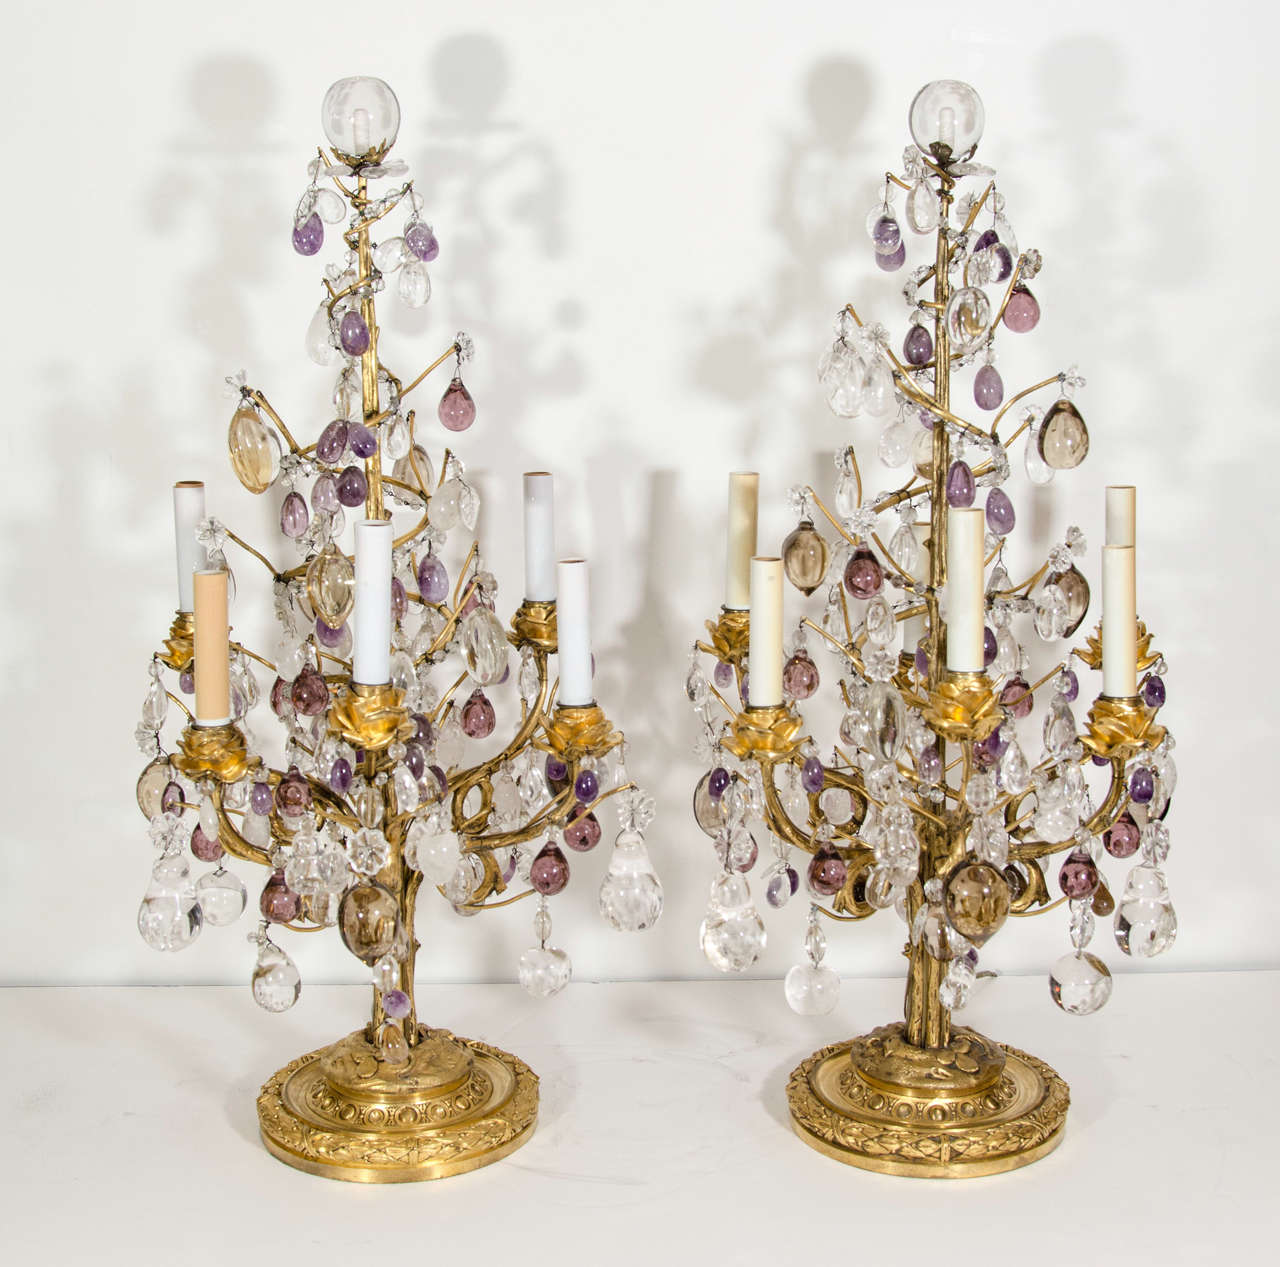 A Pair of Exquisite & Rare Antique French Louis XVI Style Gilt Bronze, Cut Rock Crystal, Amethyst Rock Crystal & Amber Glass multi light Candelabra Table Lamps embellished with gilt bronze floral arms & further adorned with rock crystal fruits and